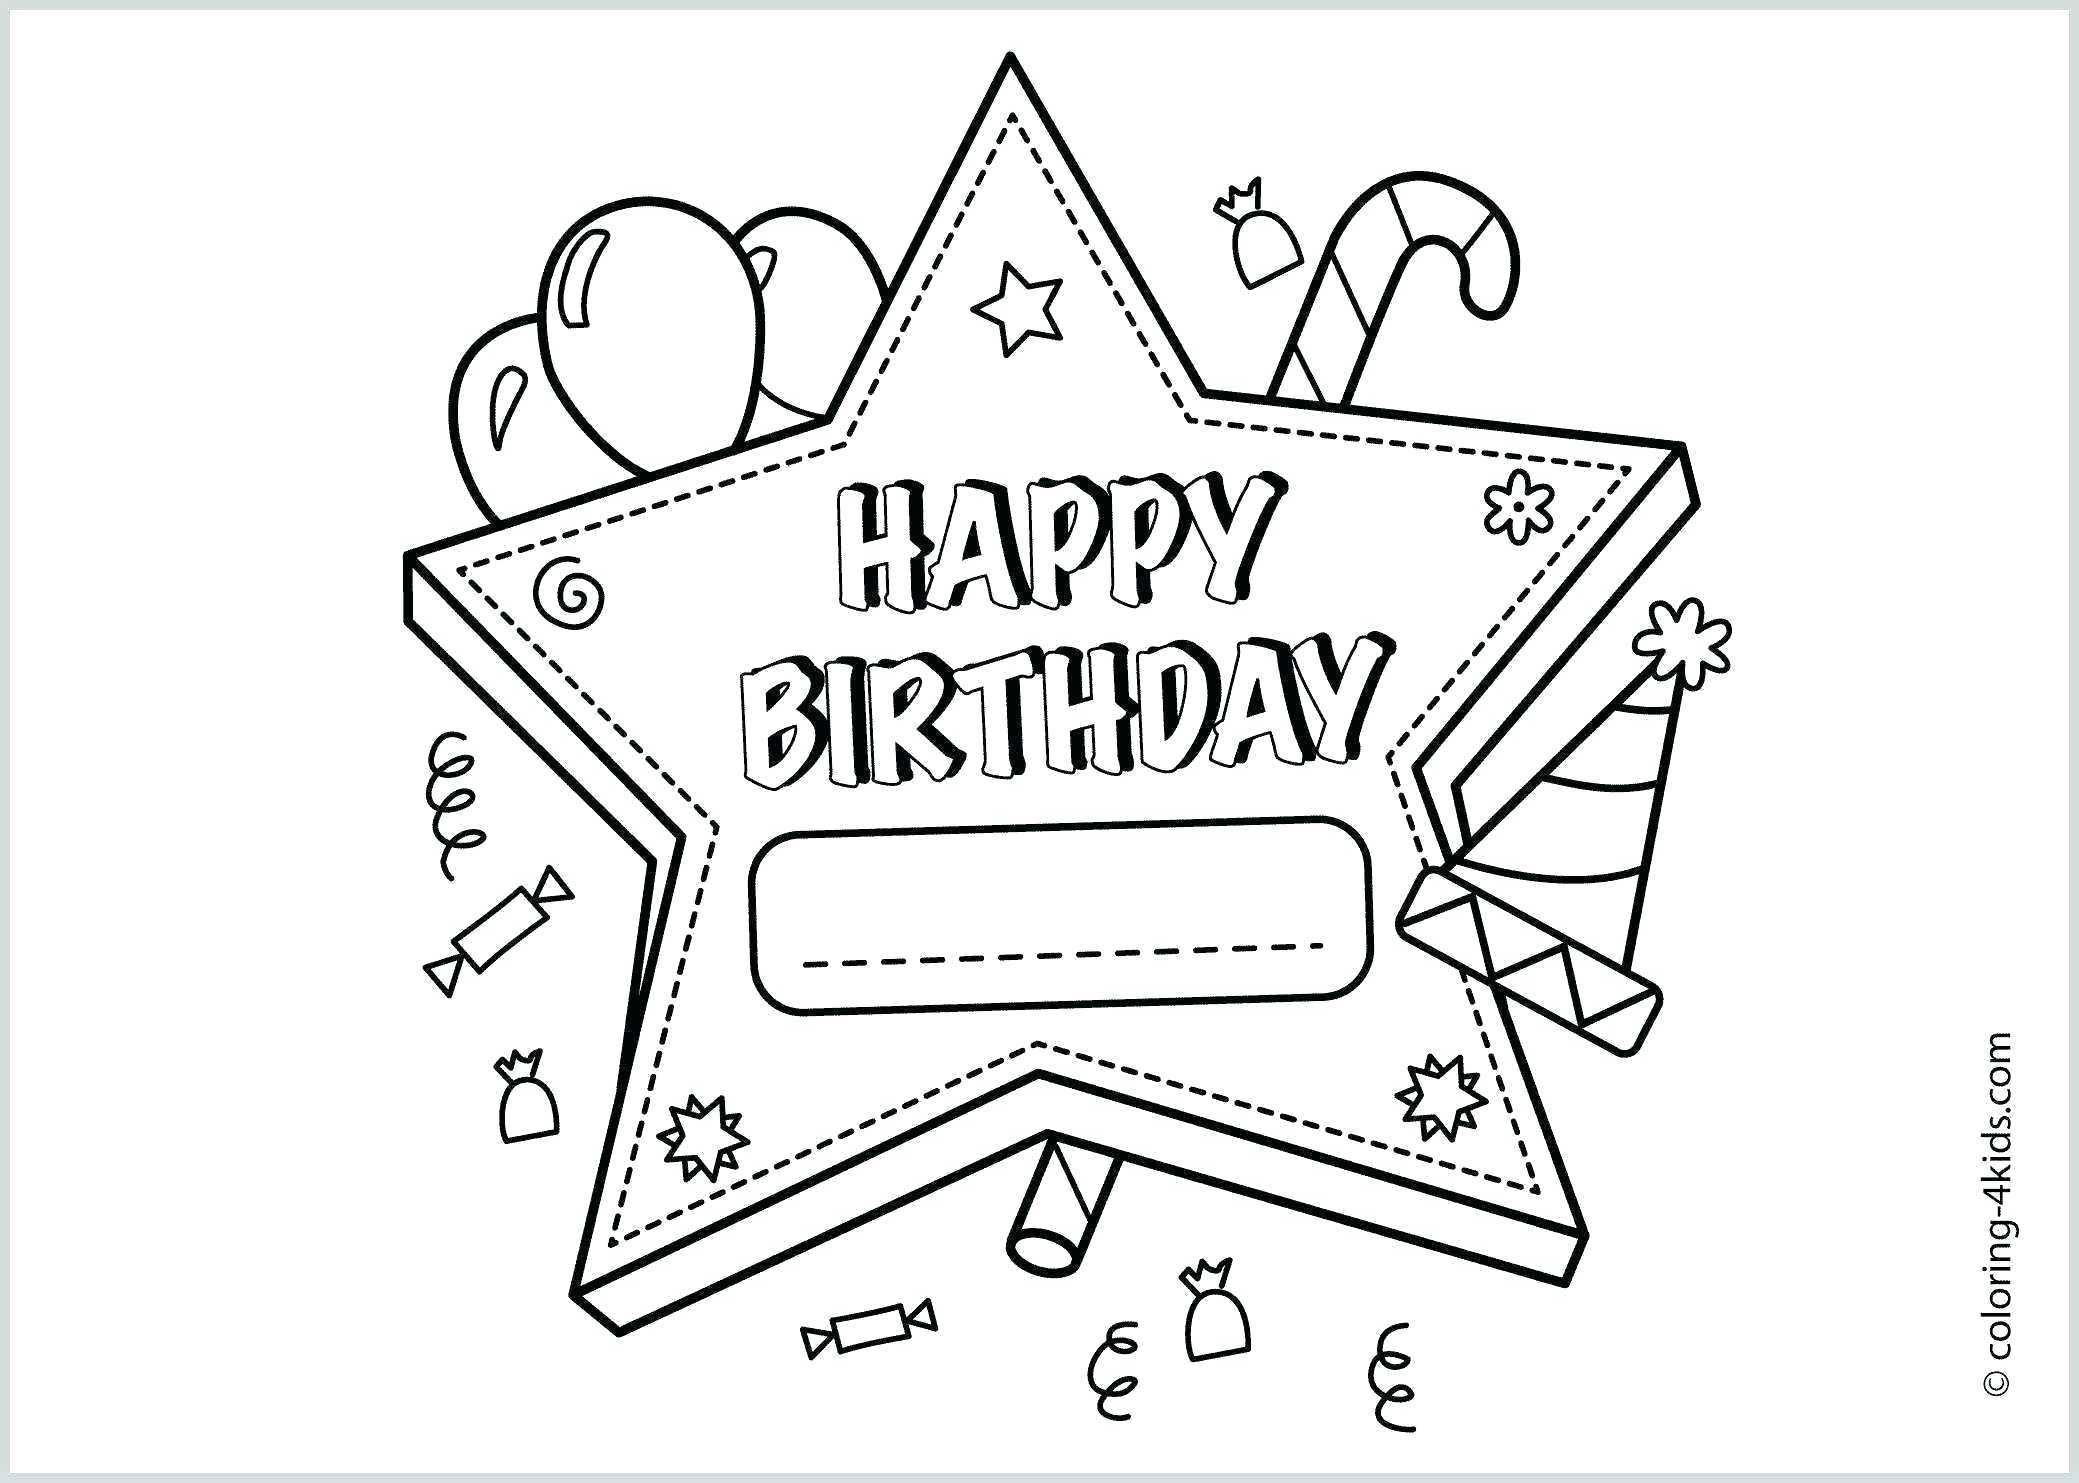 Coloring Pages : Coloring Printable Birthday Amazing Card Pertaining To Template For Cards To Print Free